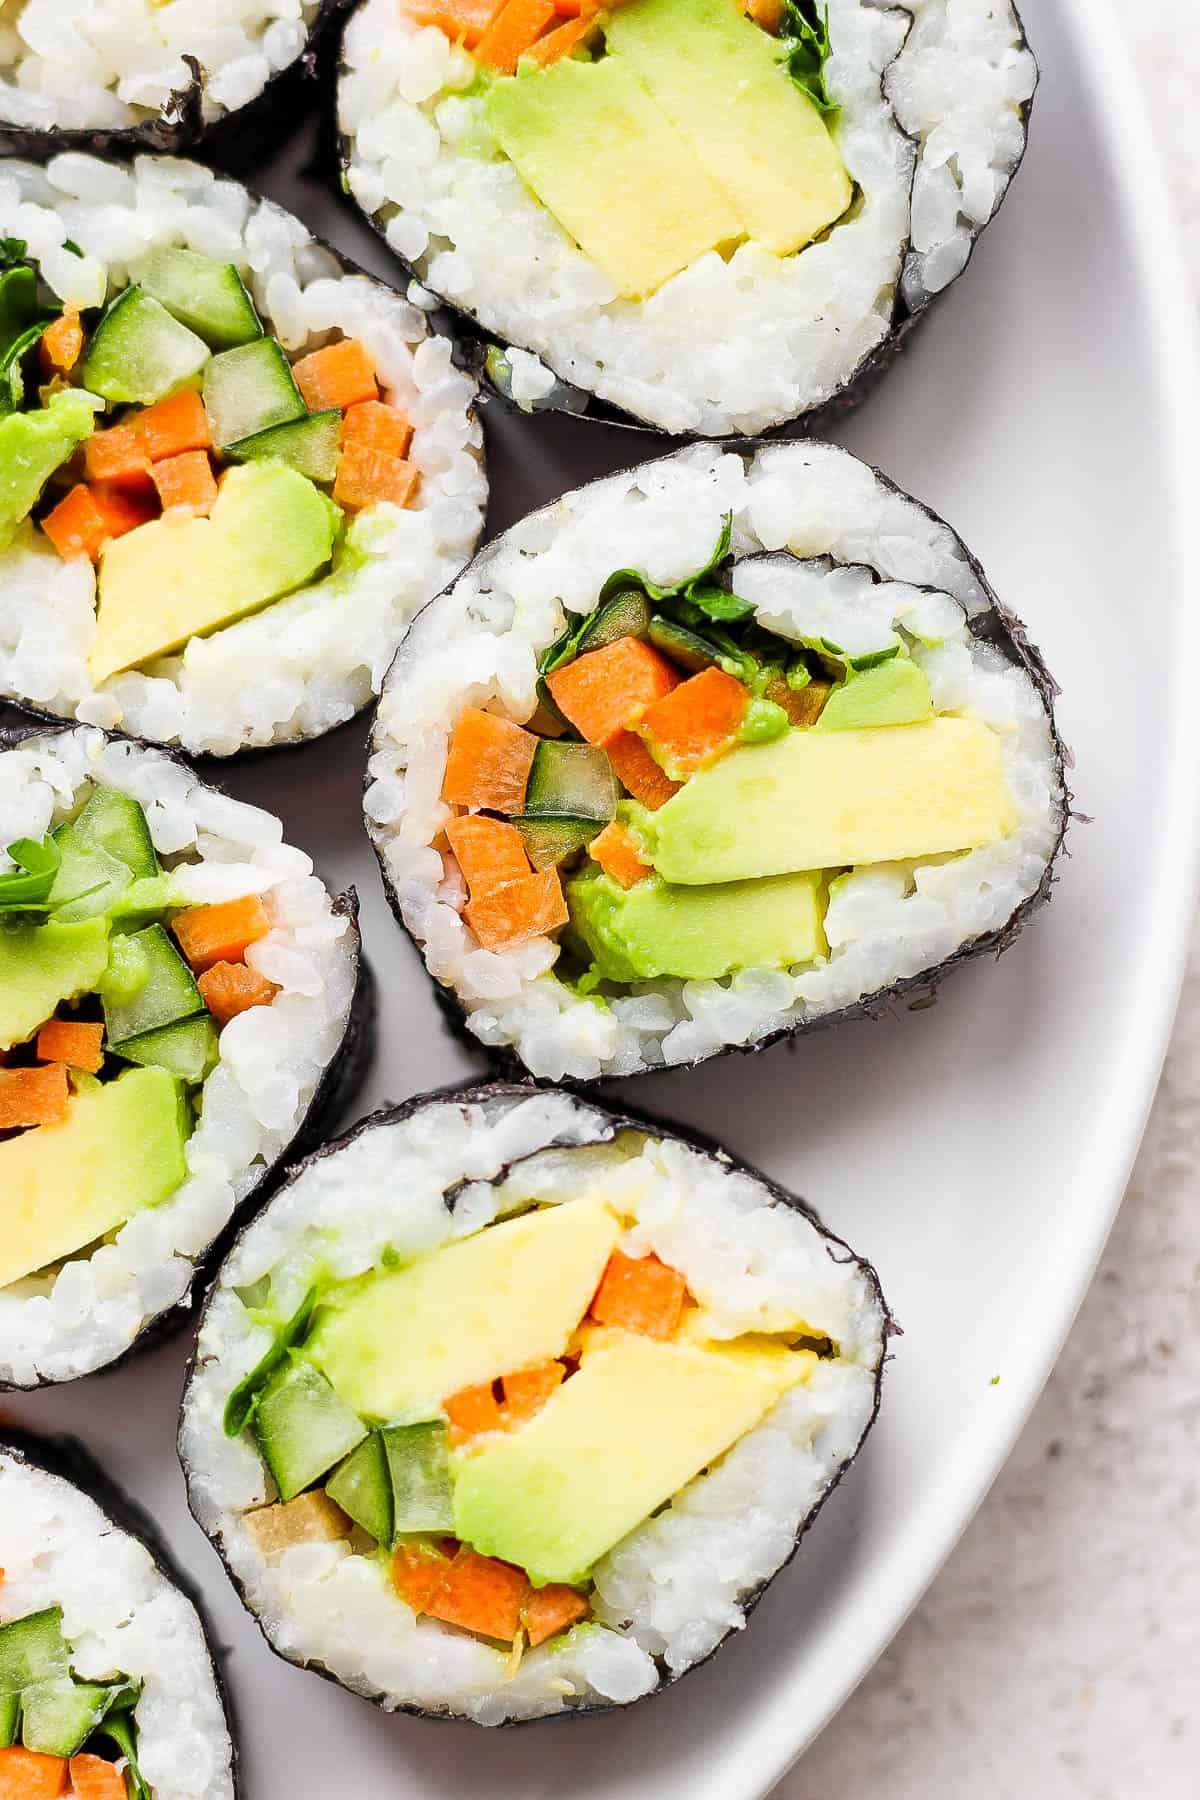 Pieces of an avocado roll on a white plate.